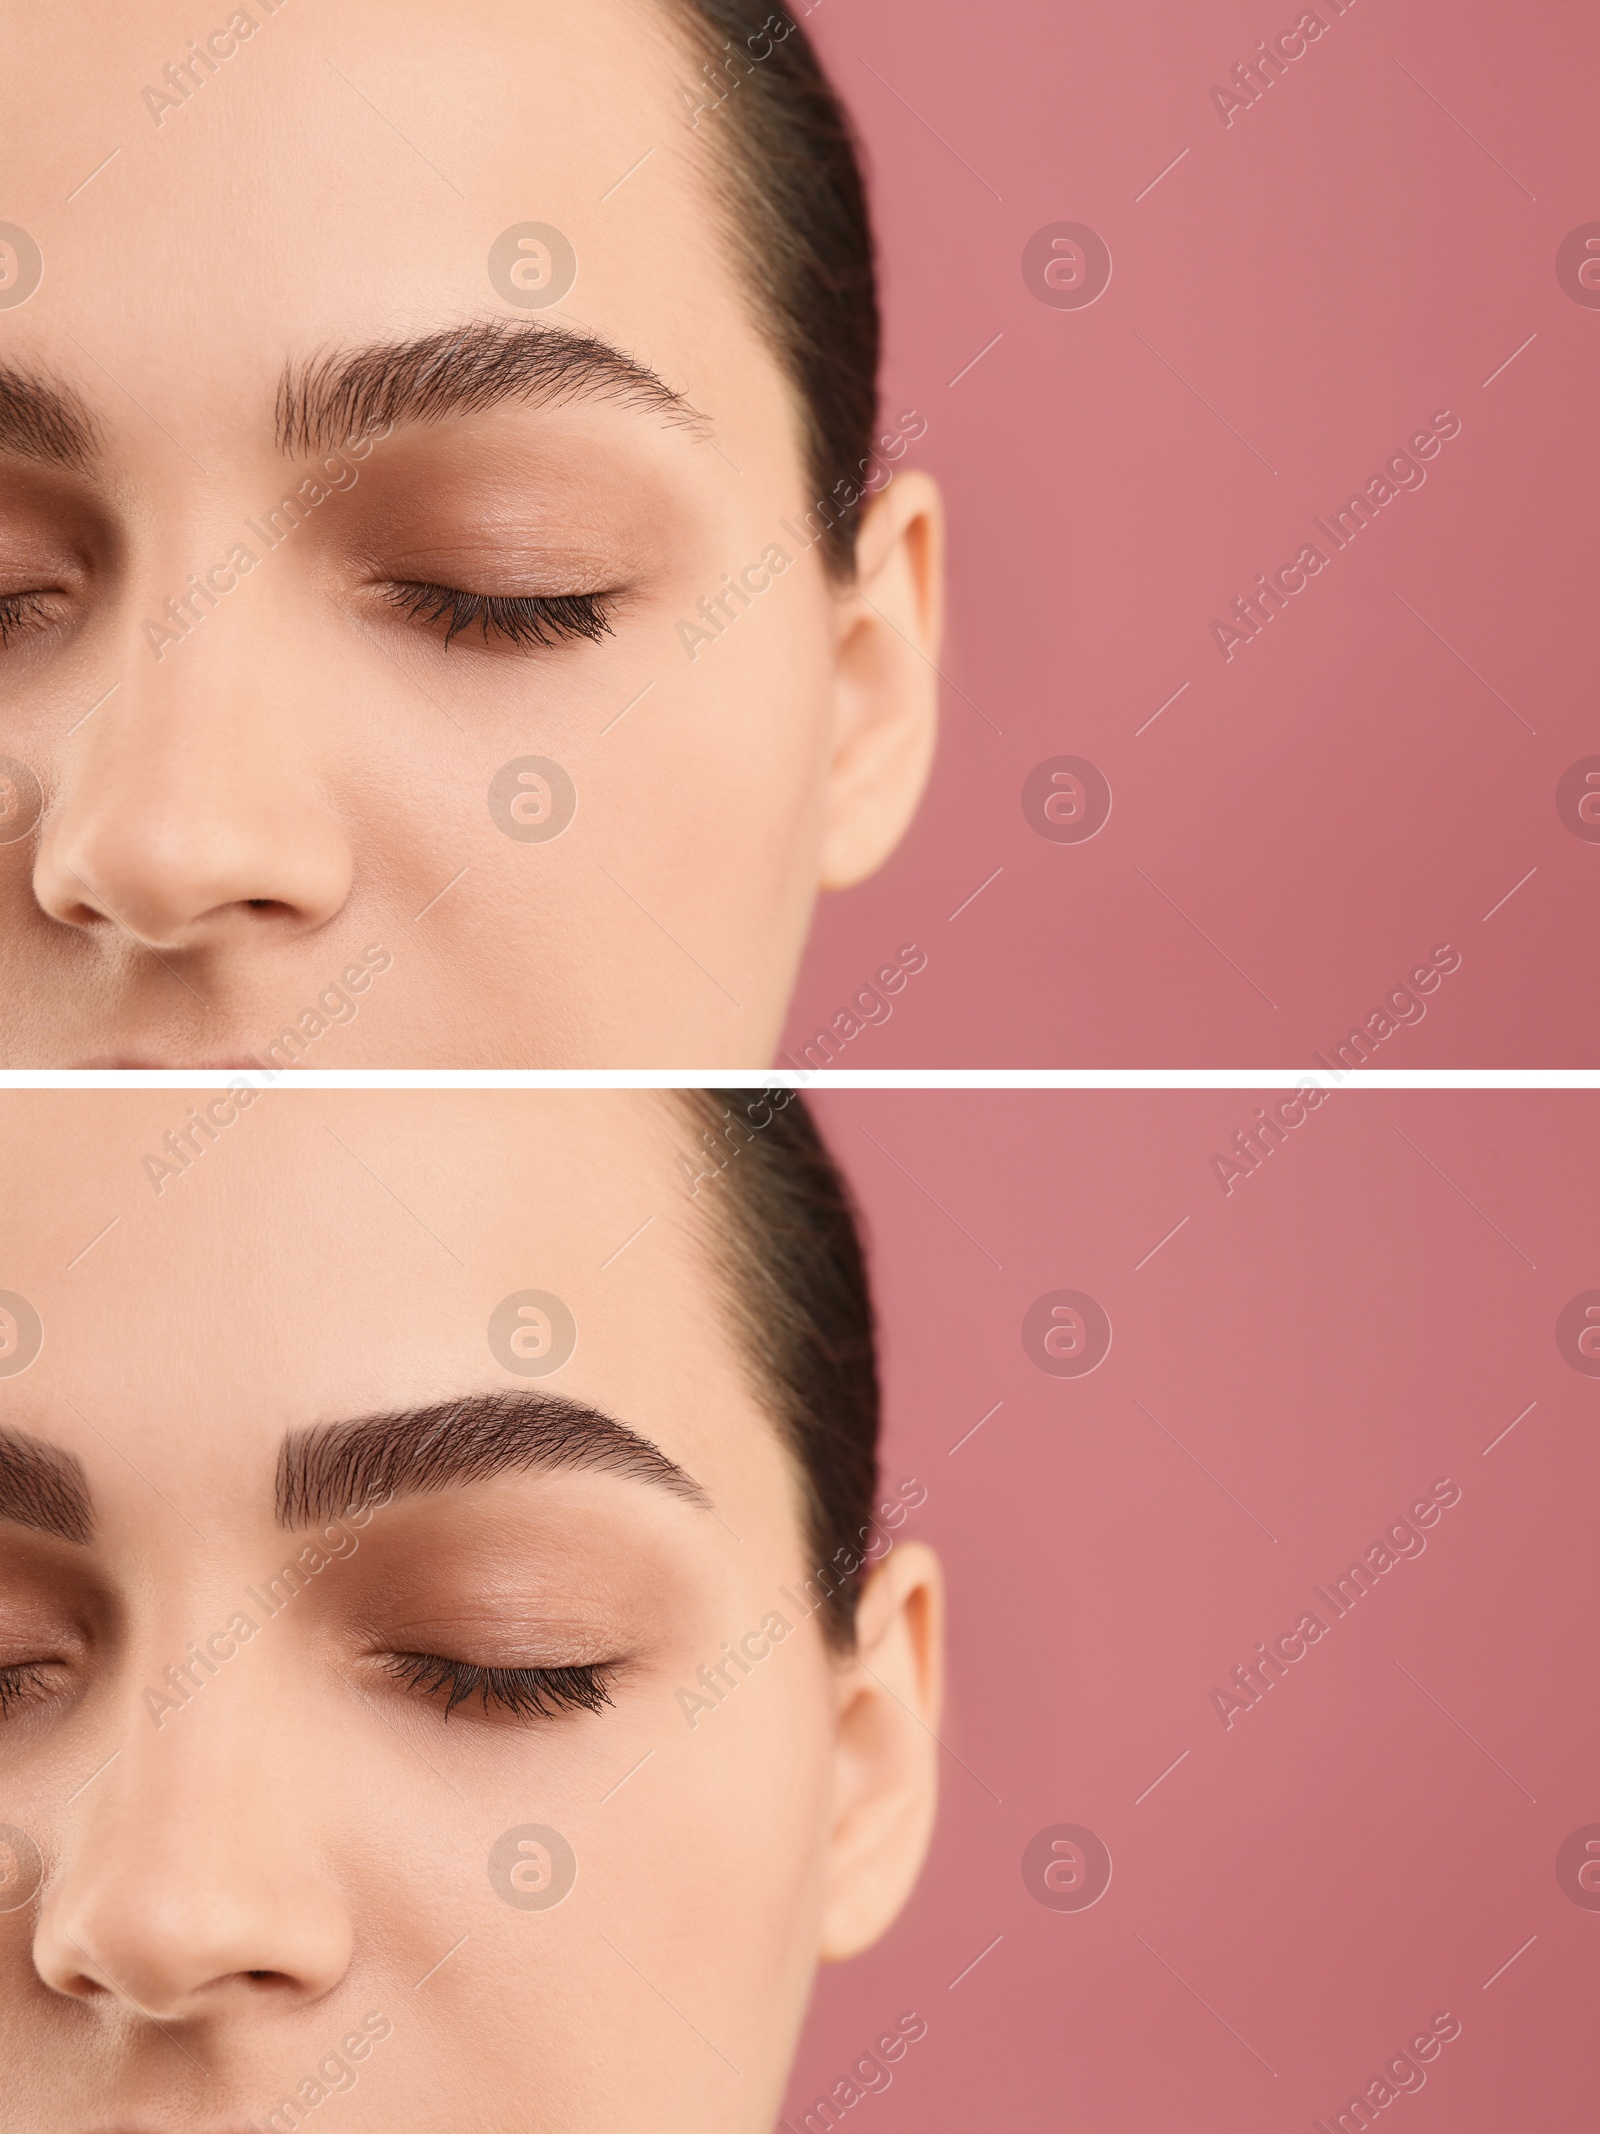 Image of Beautiful woman before and after permanent makeup eyebrow procedure on pink background, closeup. Collage of photos